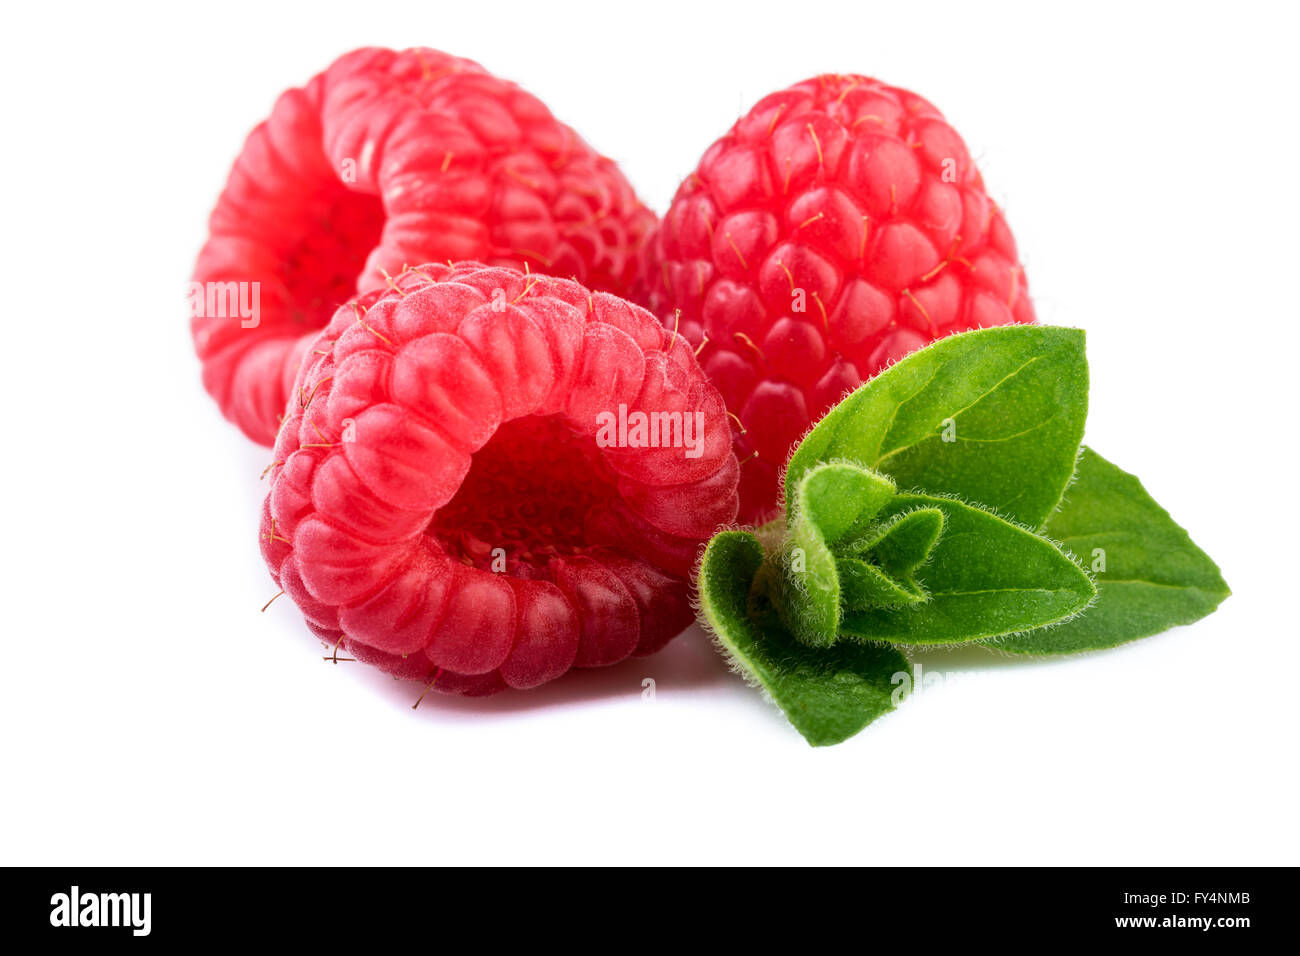 Raspberry with mint leaf close up Stock Photo